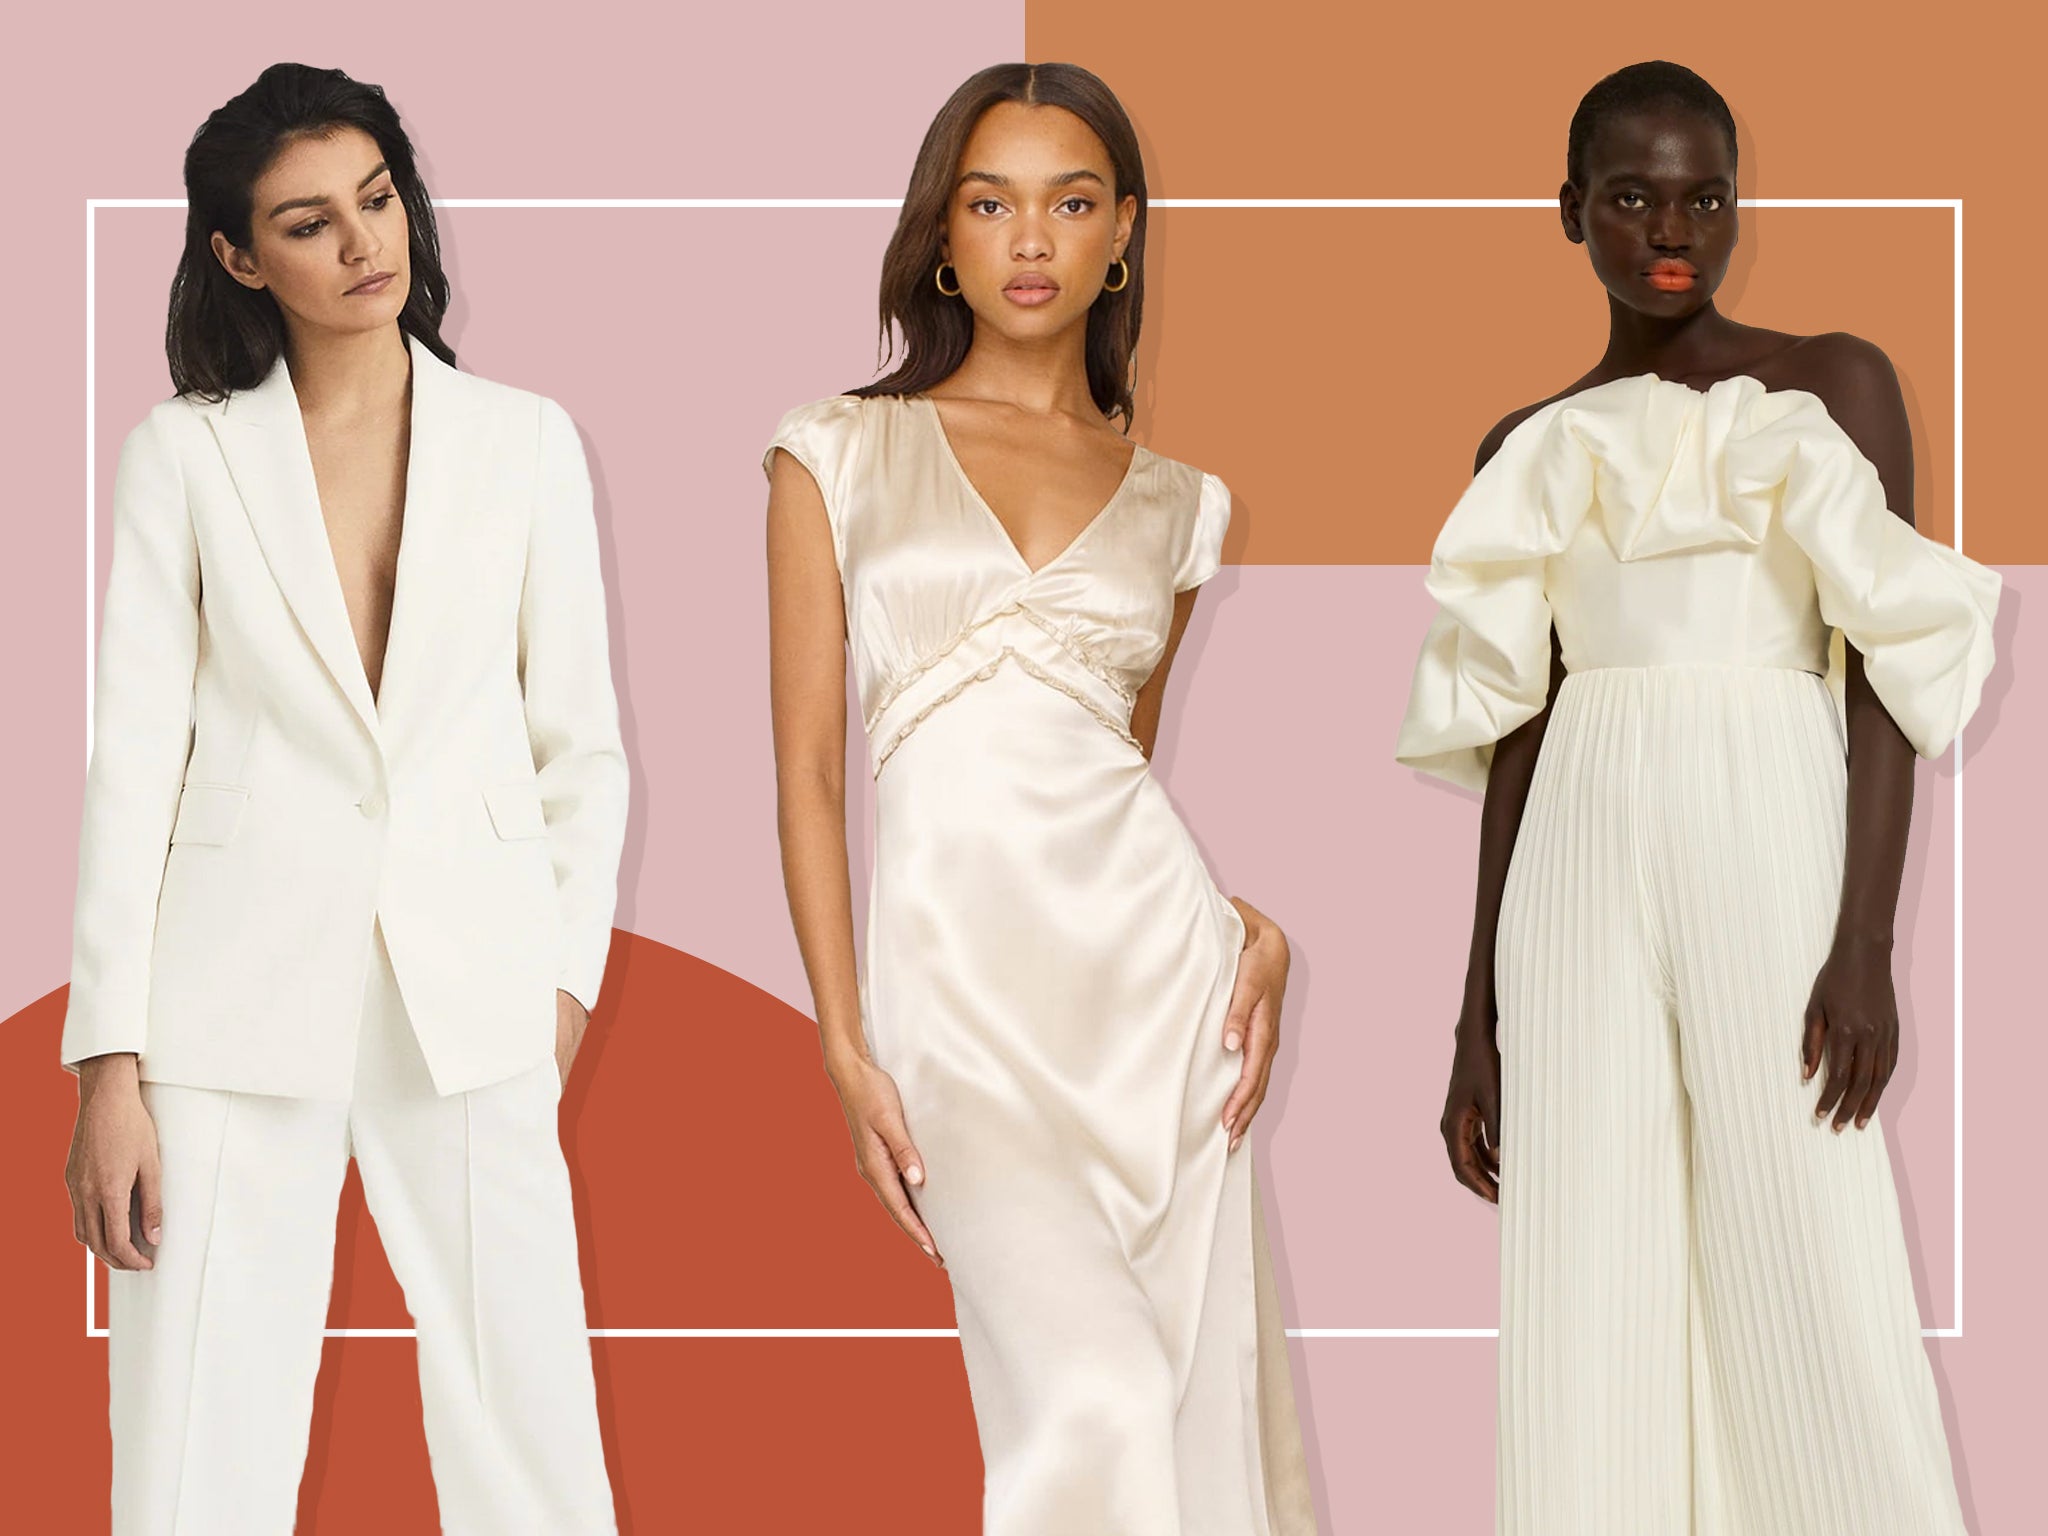 Wedding Outfits for Women | The Wedding Shop | J D Williams